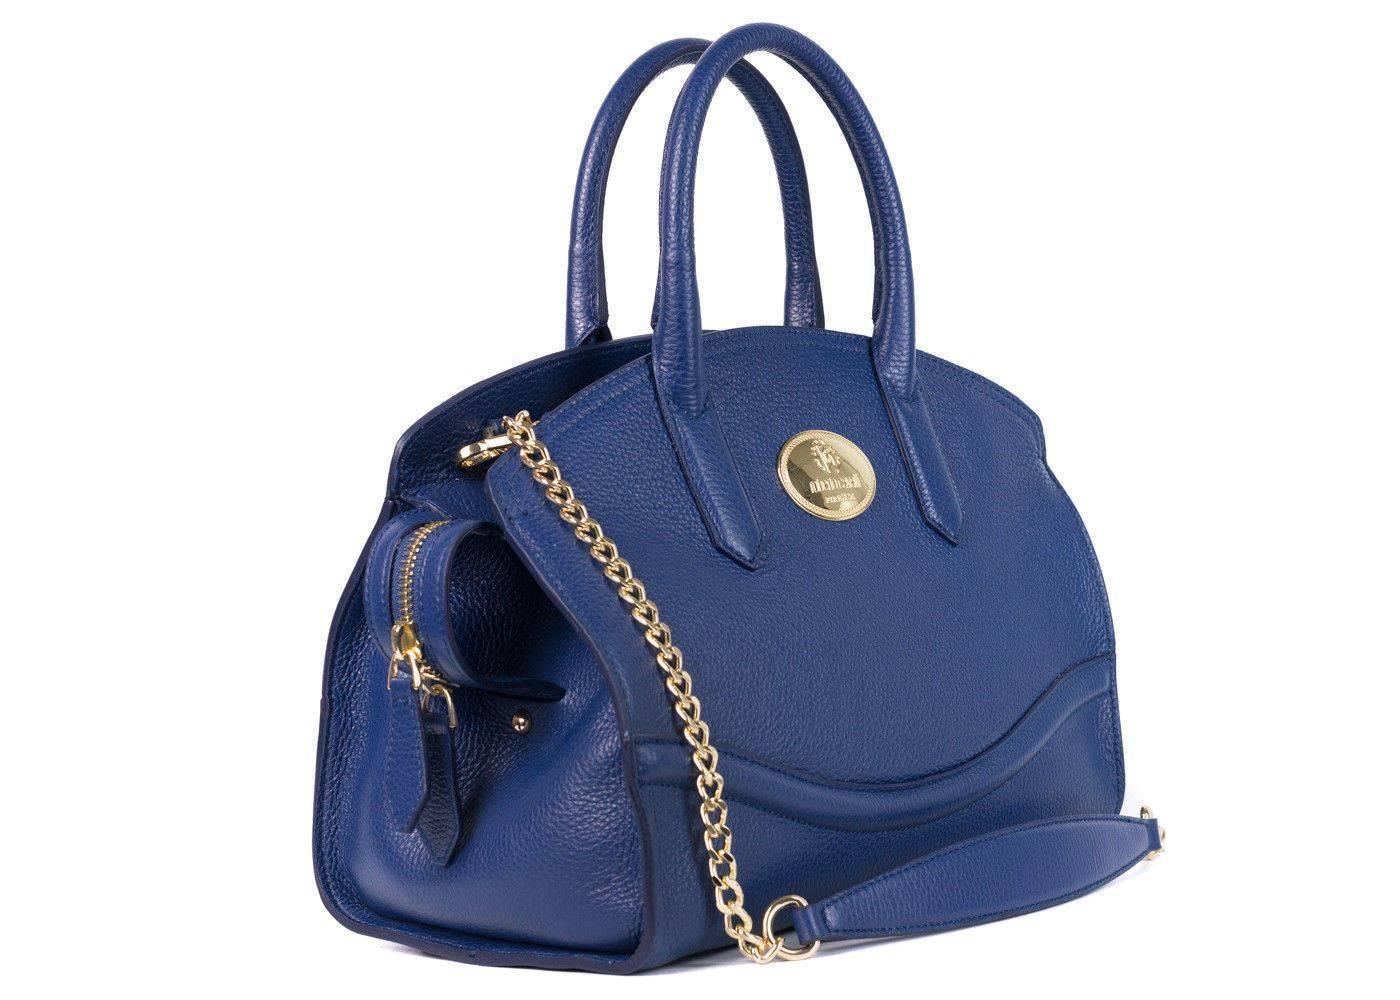 Brand New Roberto Cavalli Boston Bags
Original Tags & Dust Bag Included
Retails in Stores & Online for $1295
Considered as Medium

Reinvent the way to style and store in your Roberto Cavalli Tote. This spacious grained leather beauty features a